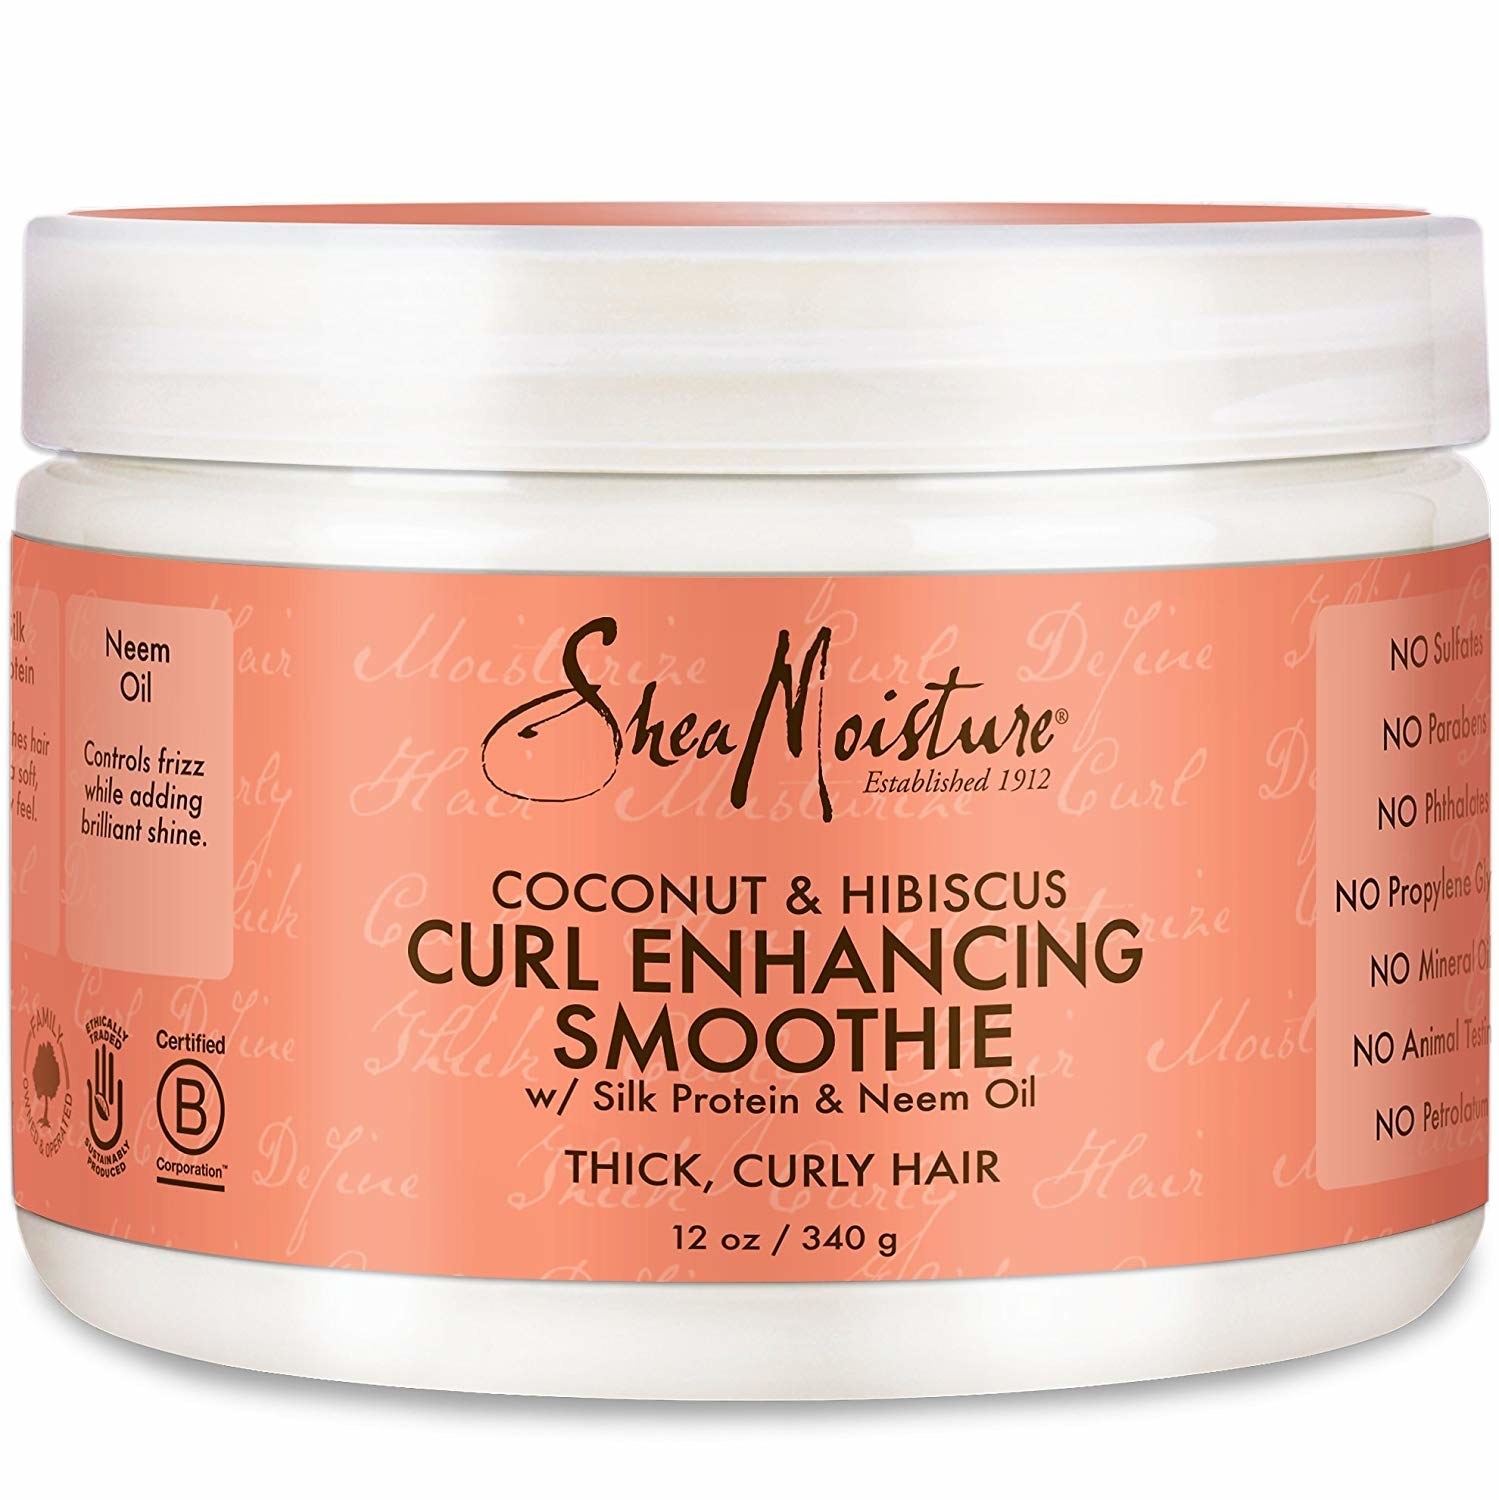 does curl enhancing smoothie work for waves